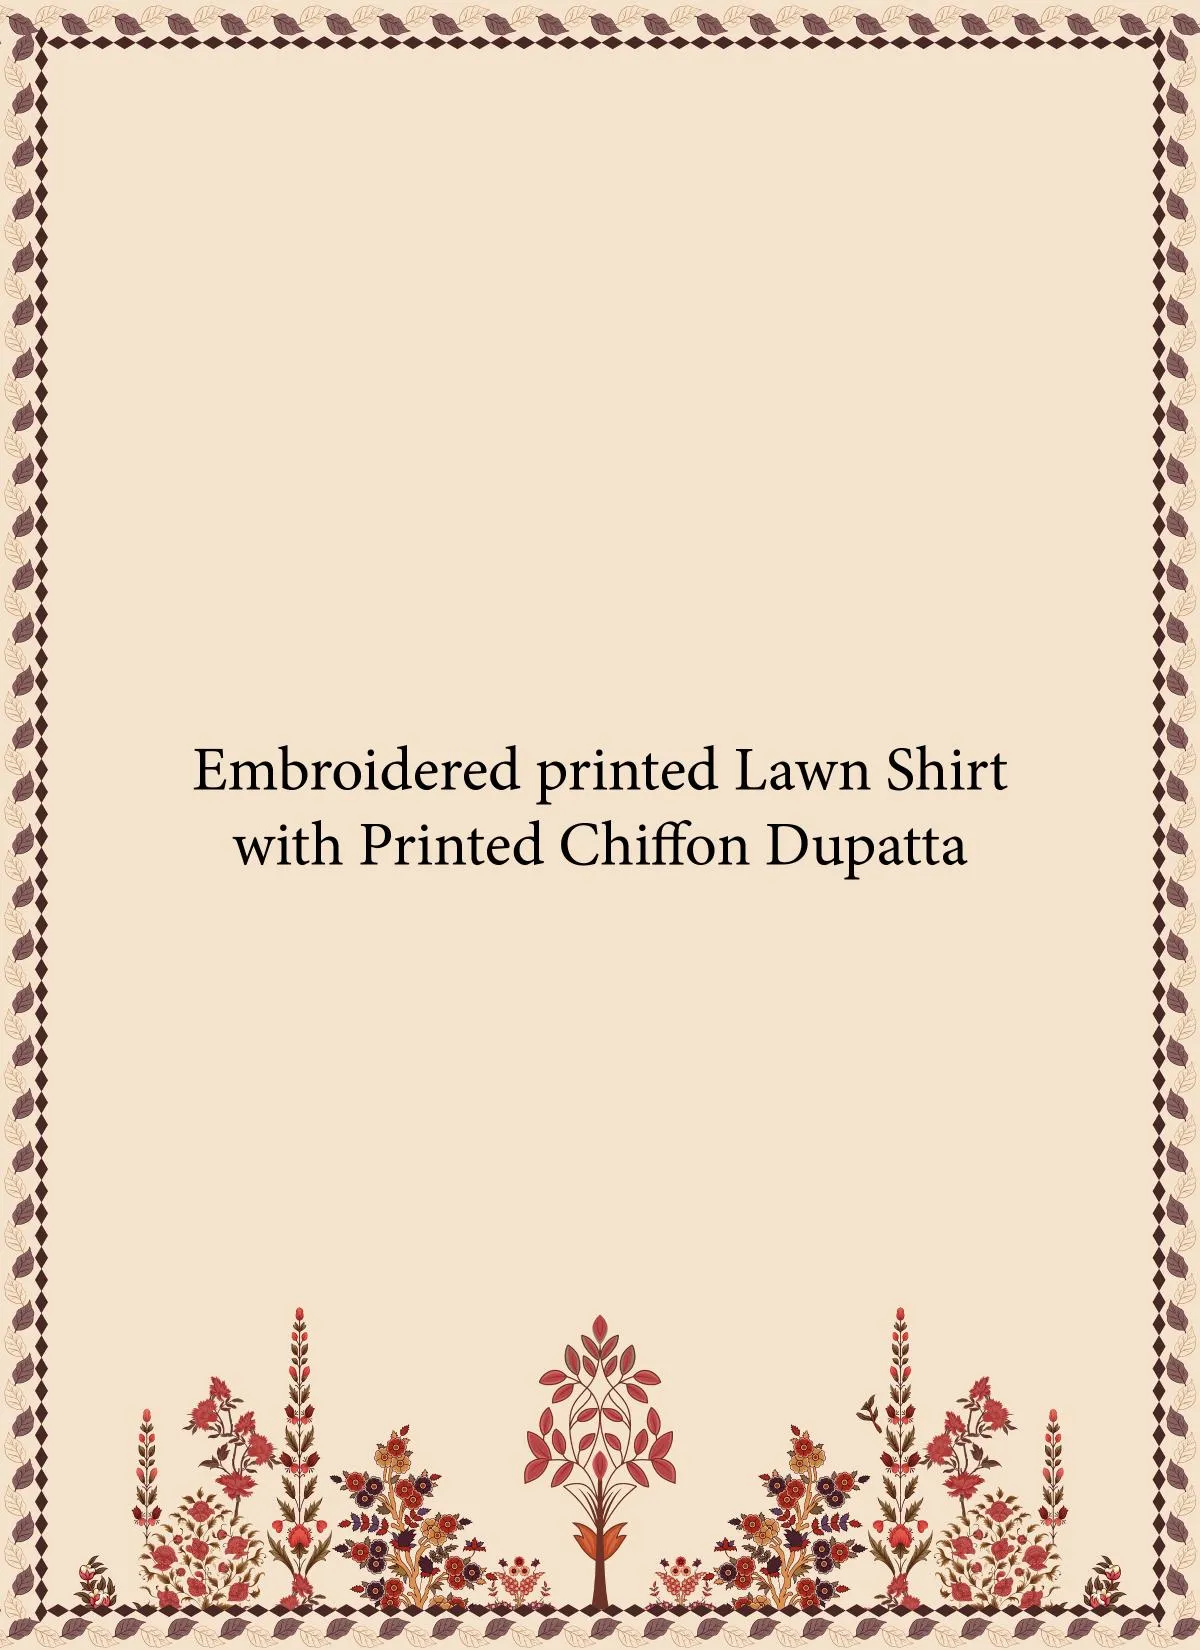 Embroidered printed lawn shirt with printed chiffon dupatta